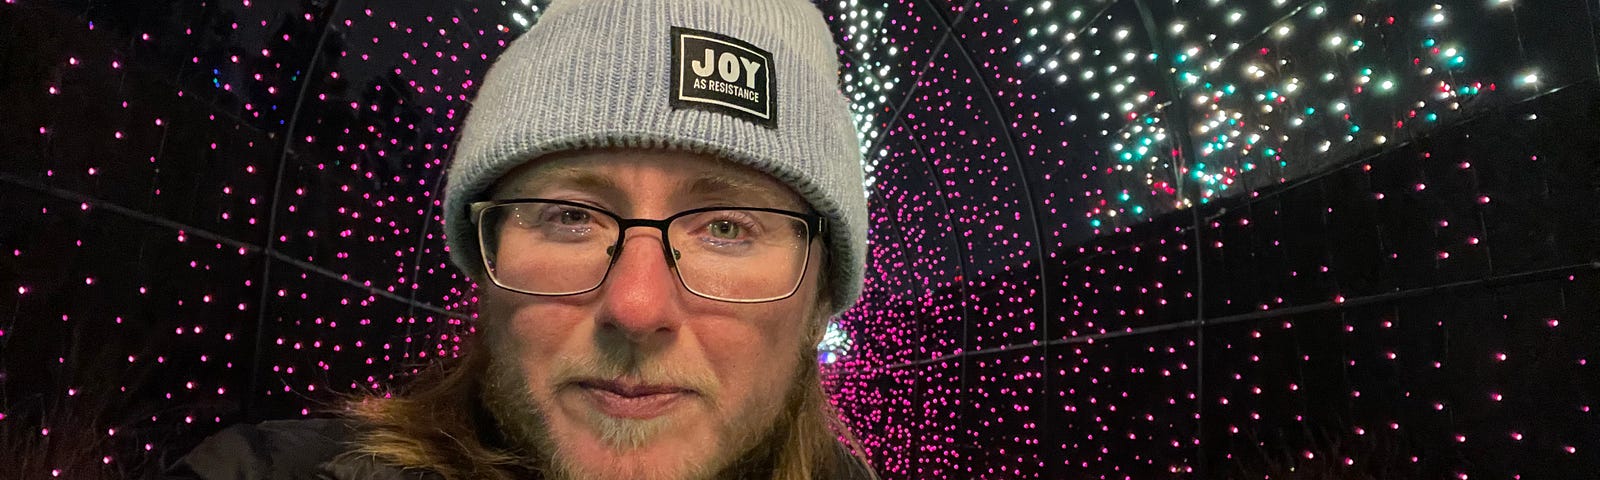 The author is surrounded by white and purple lights. He’s wearing a knitted hat that says “Joy as resistance.” He’s wearing black rimmed glasses and has a beard with enough white to betray that he’s middle-aged. He has long brown hair and a black coat that says “Denver” over a purple sweater. Purple glitter eyeliner matches the lights behind him.